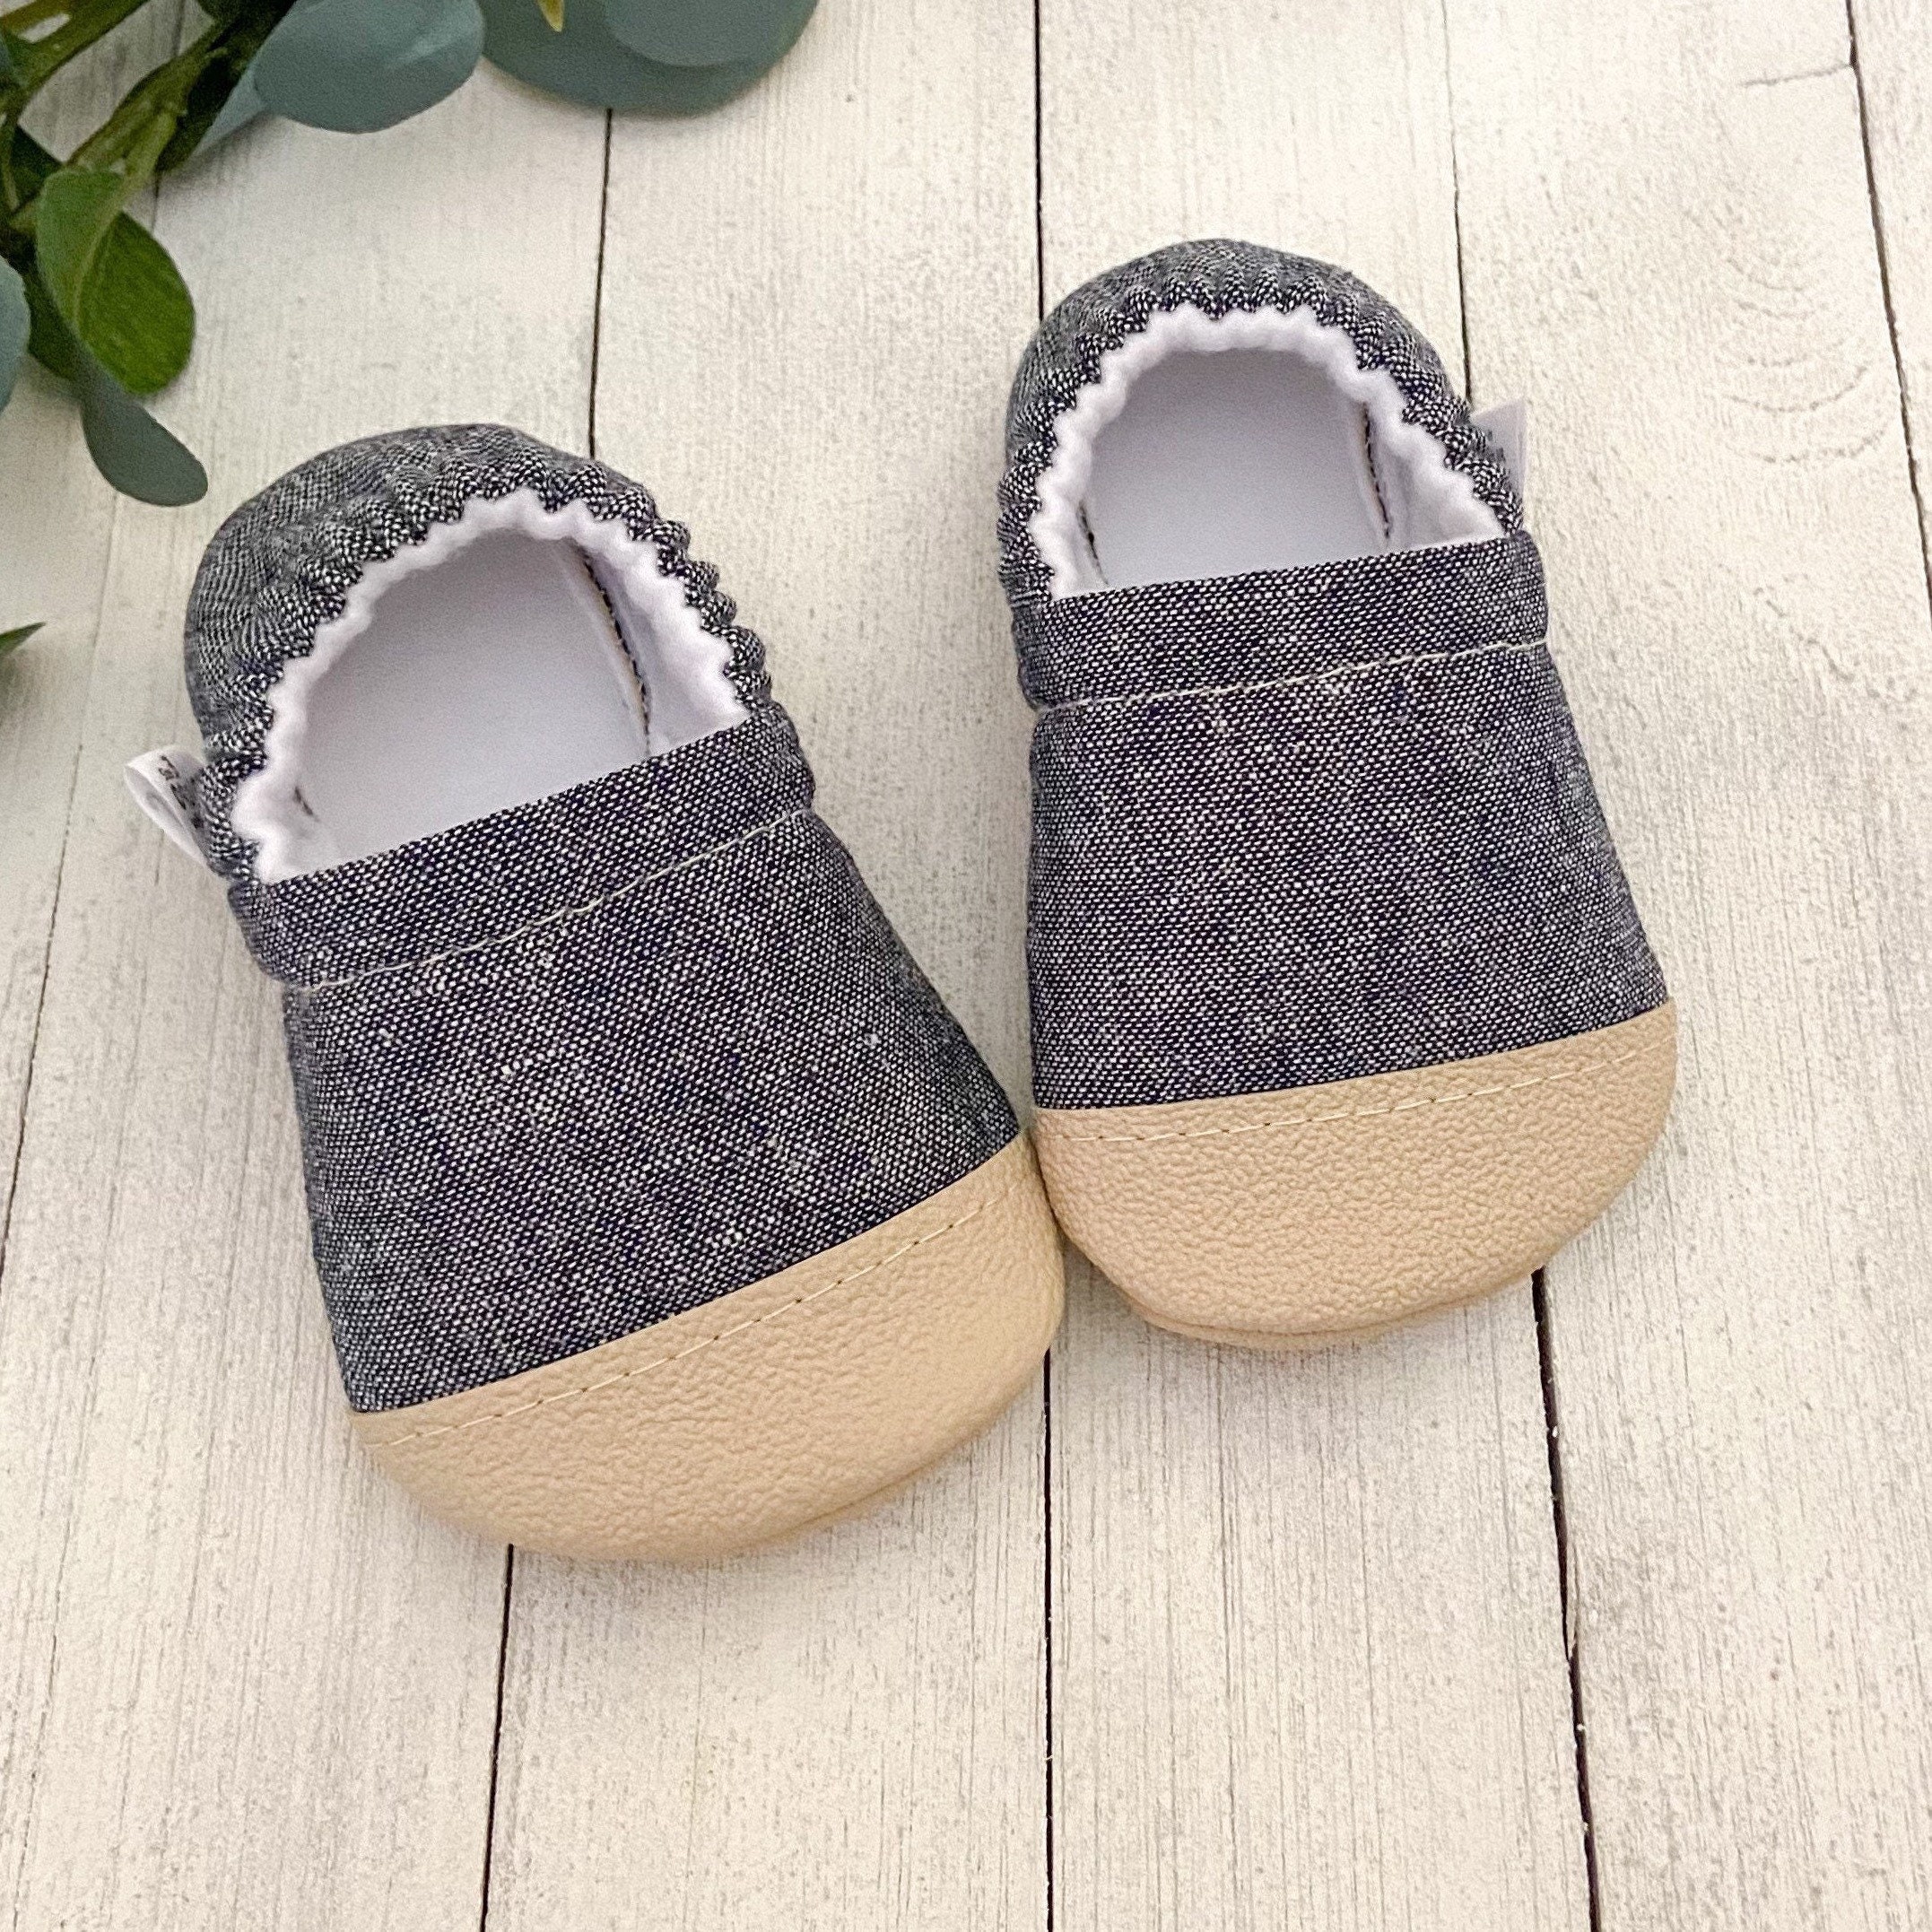 Blueberry Linen Blend Baby Booties, Slippers, Crib Shoes, Soft Sole, Moccasins, Shoes